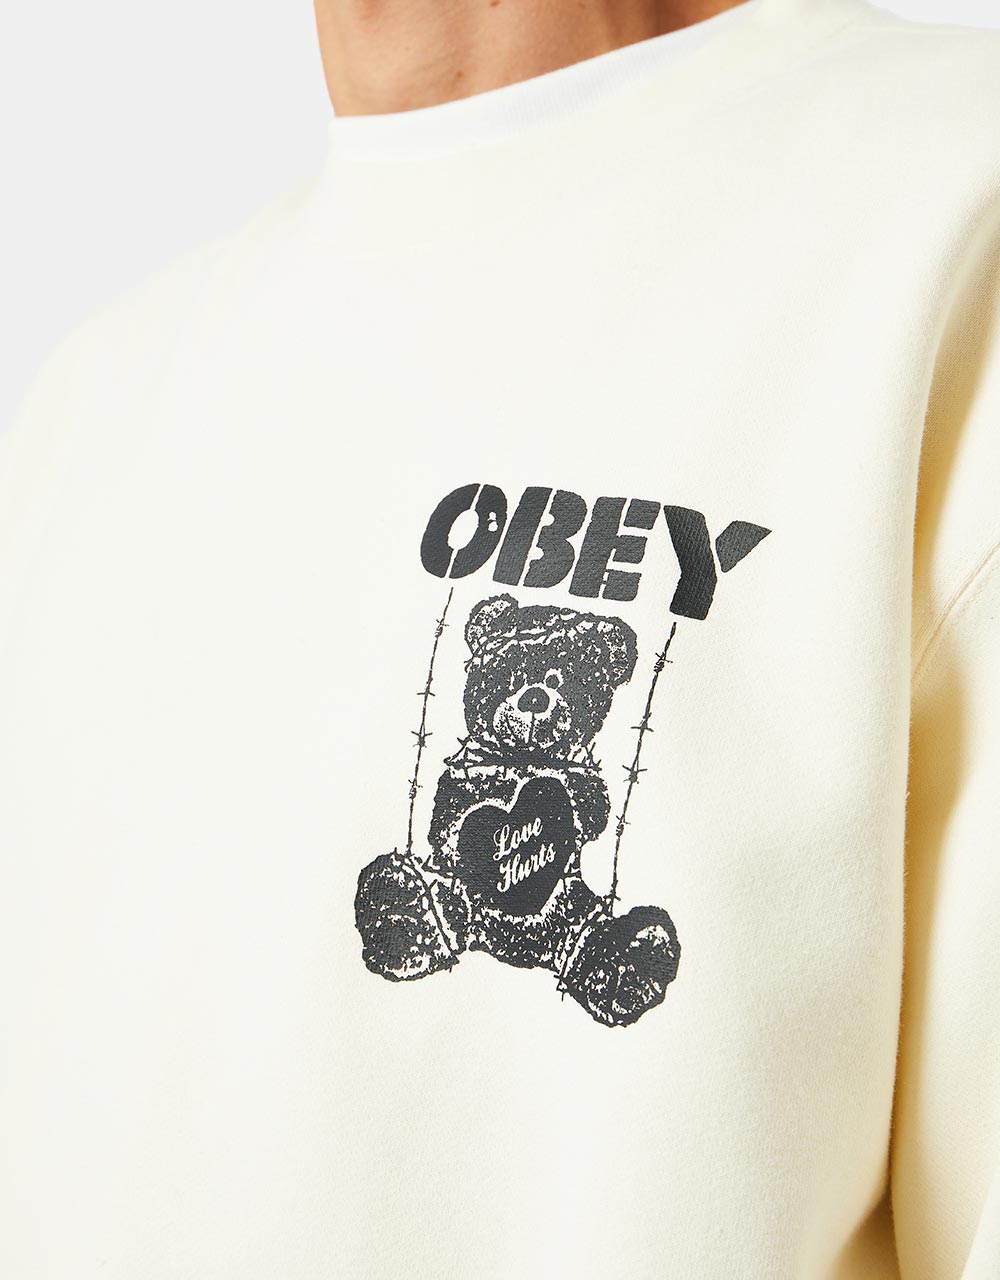 Obey Love Hurts Crewneck - Unbleached